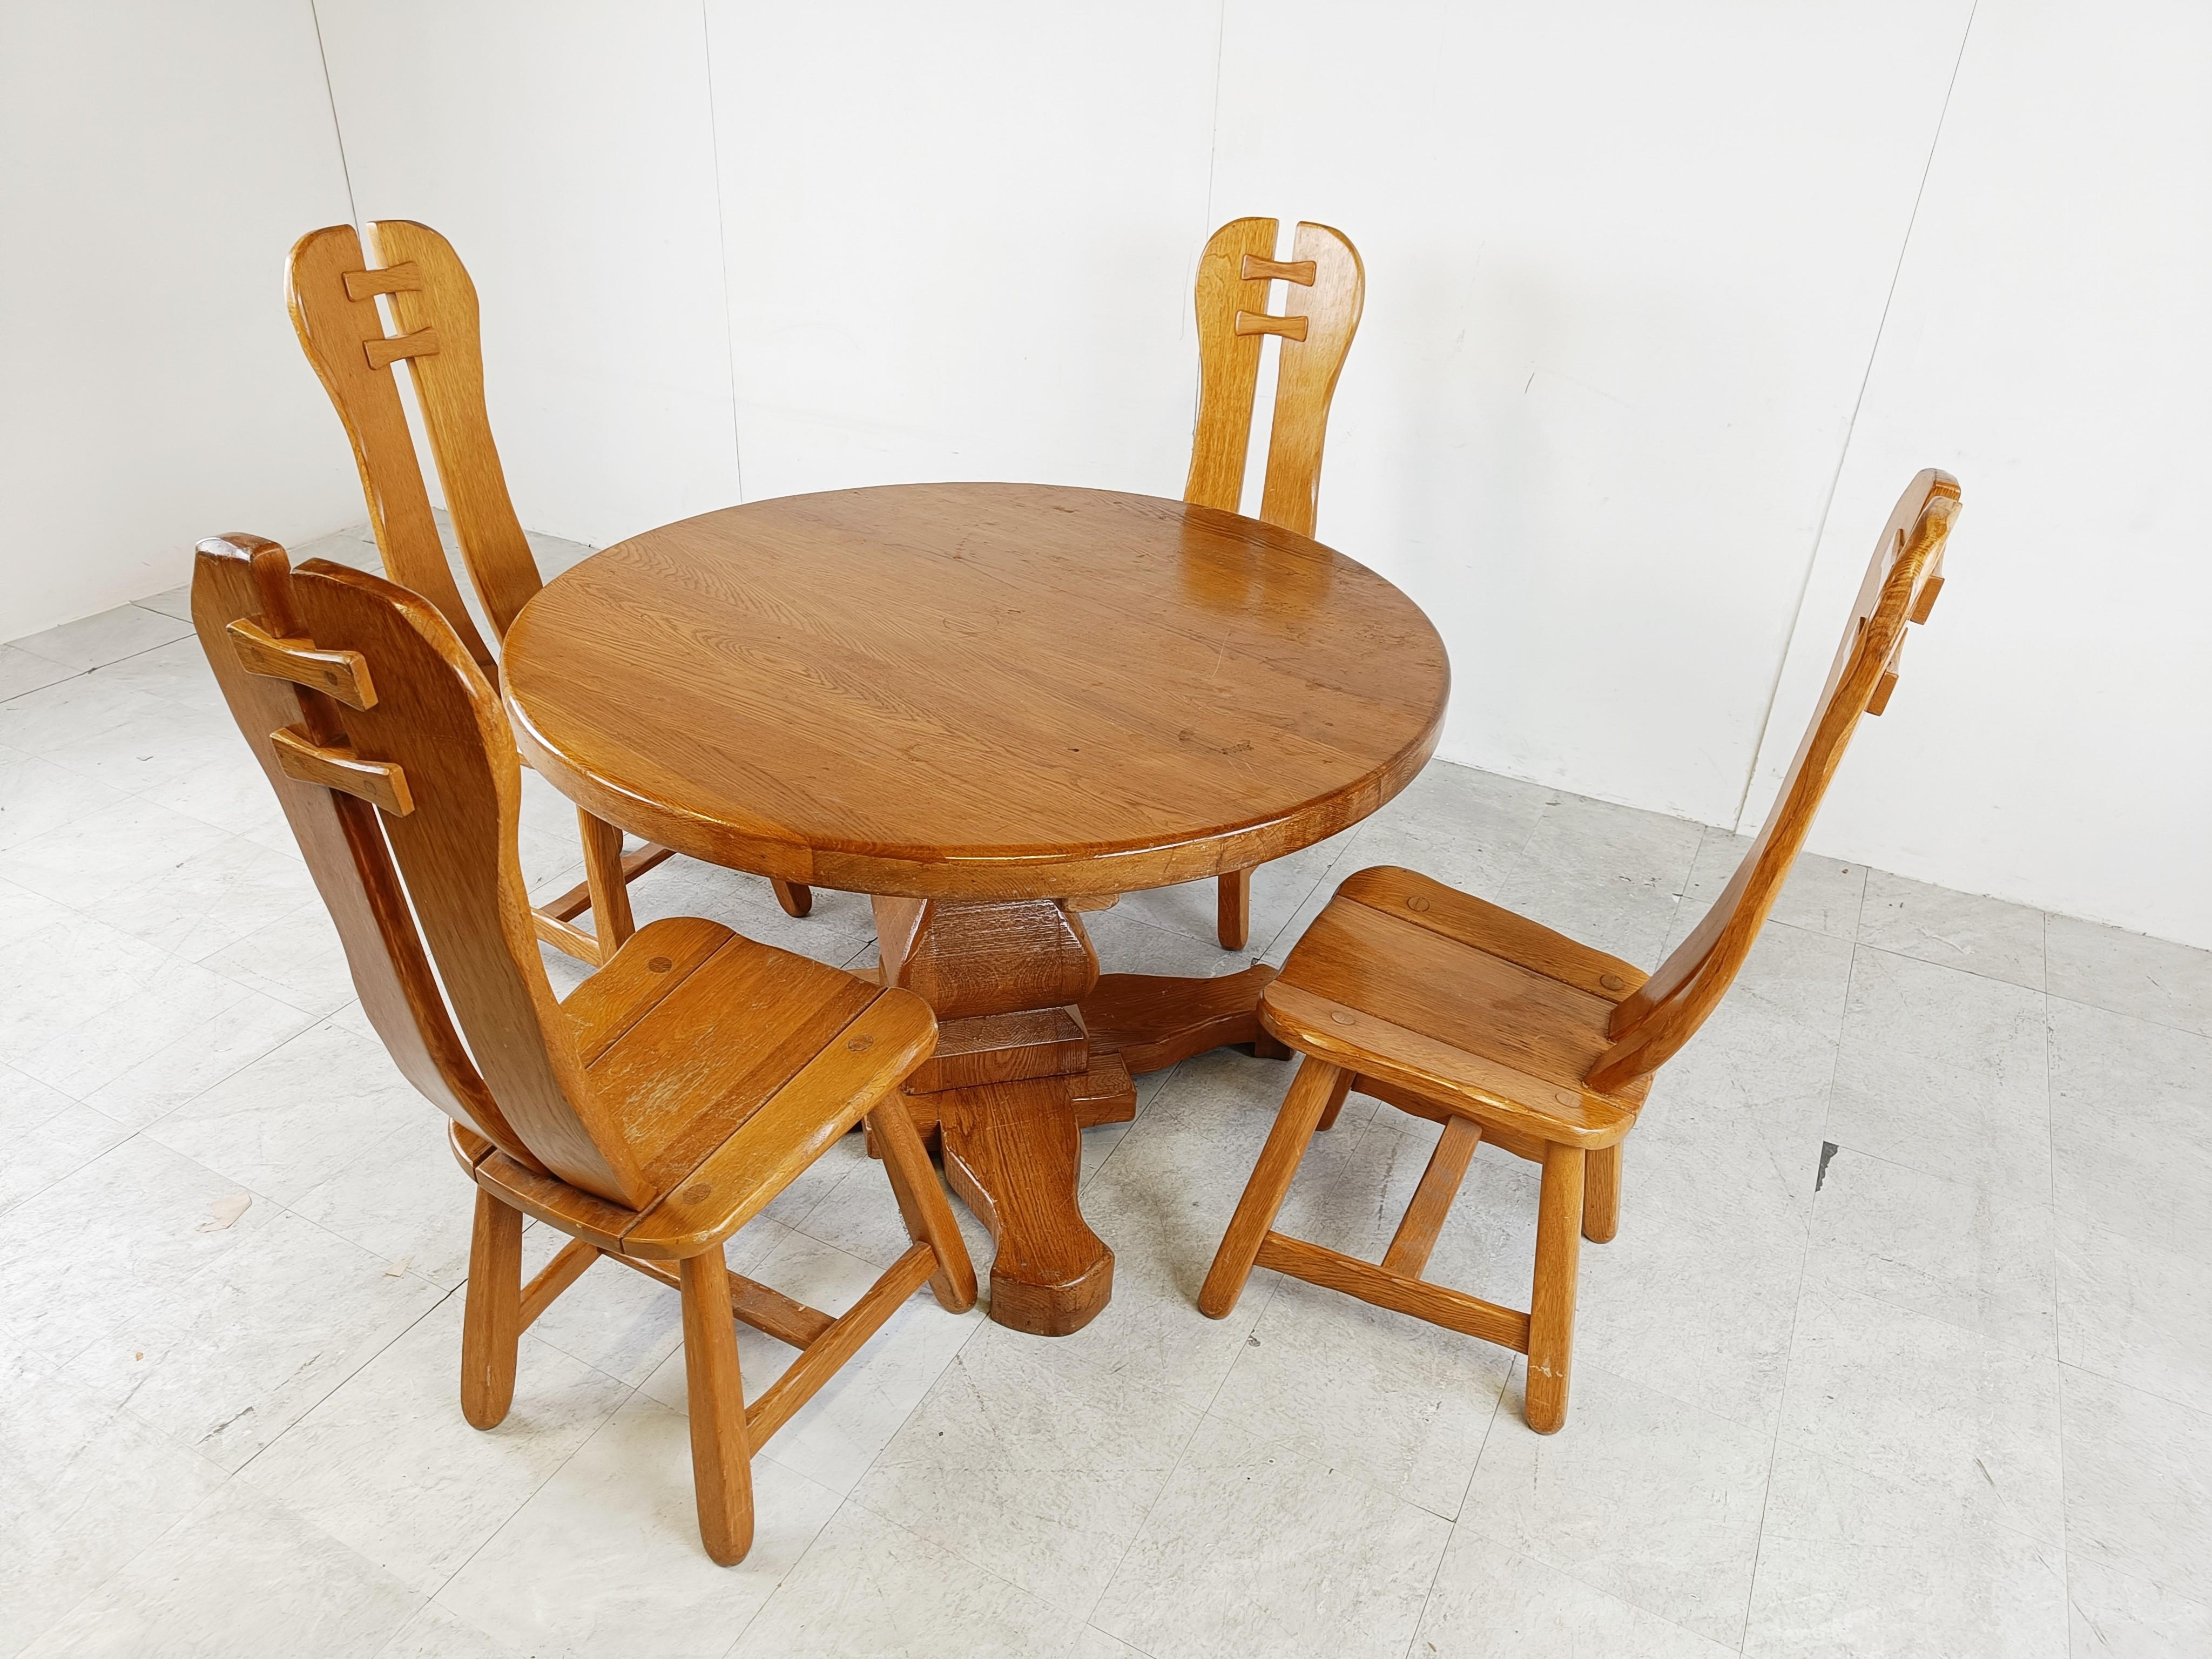 vintage children's wooden table and chairs